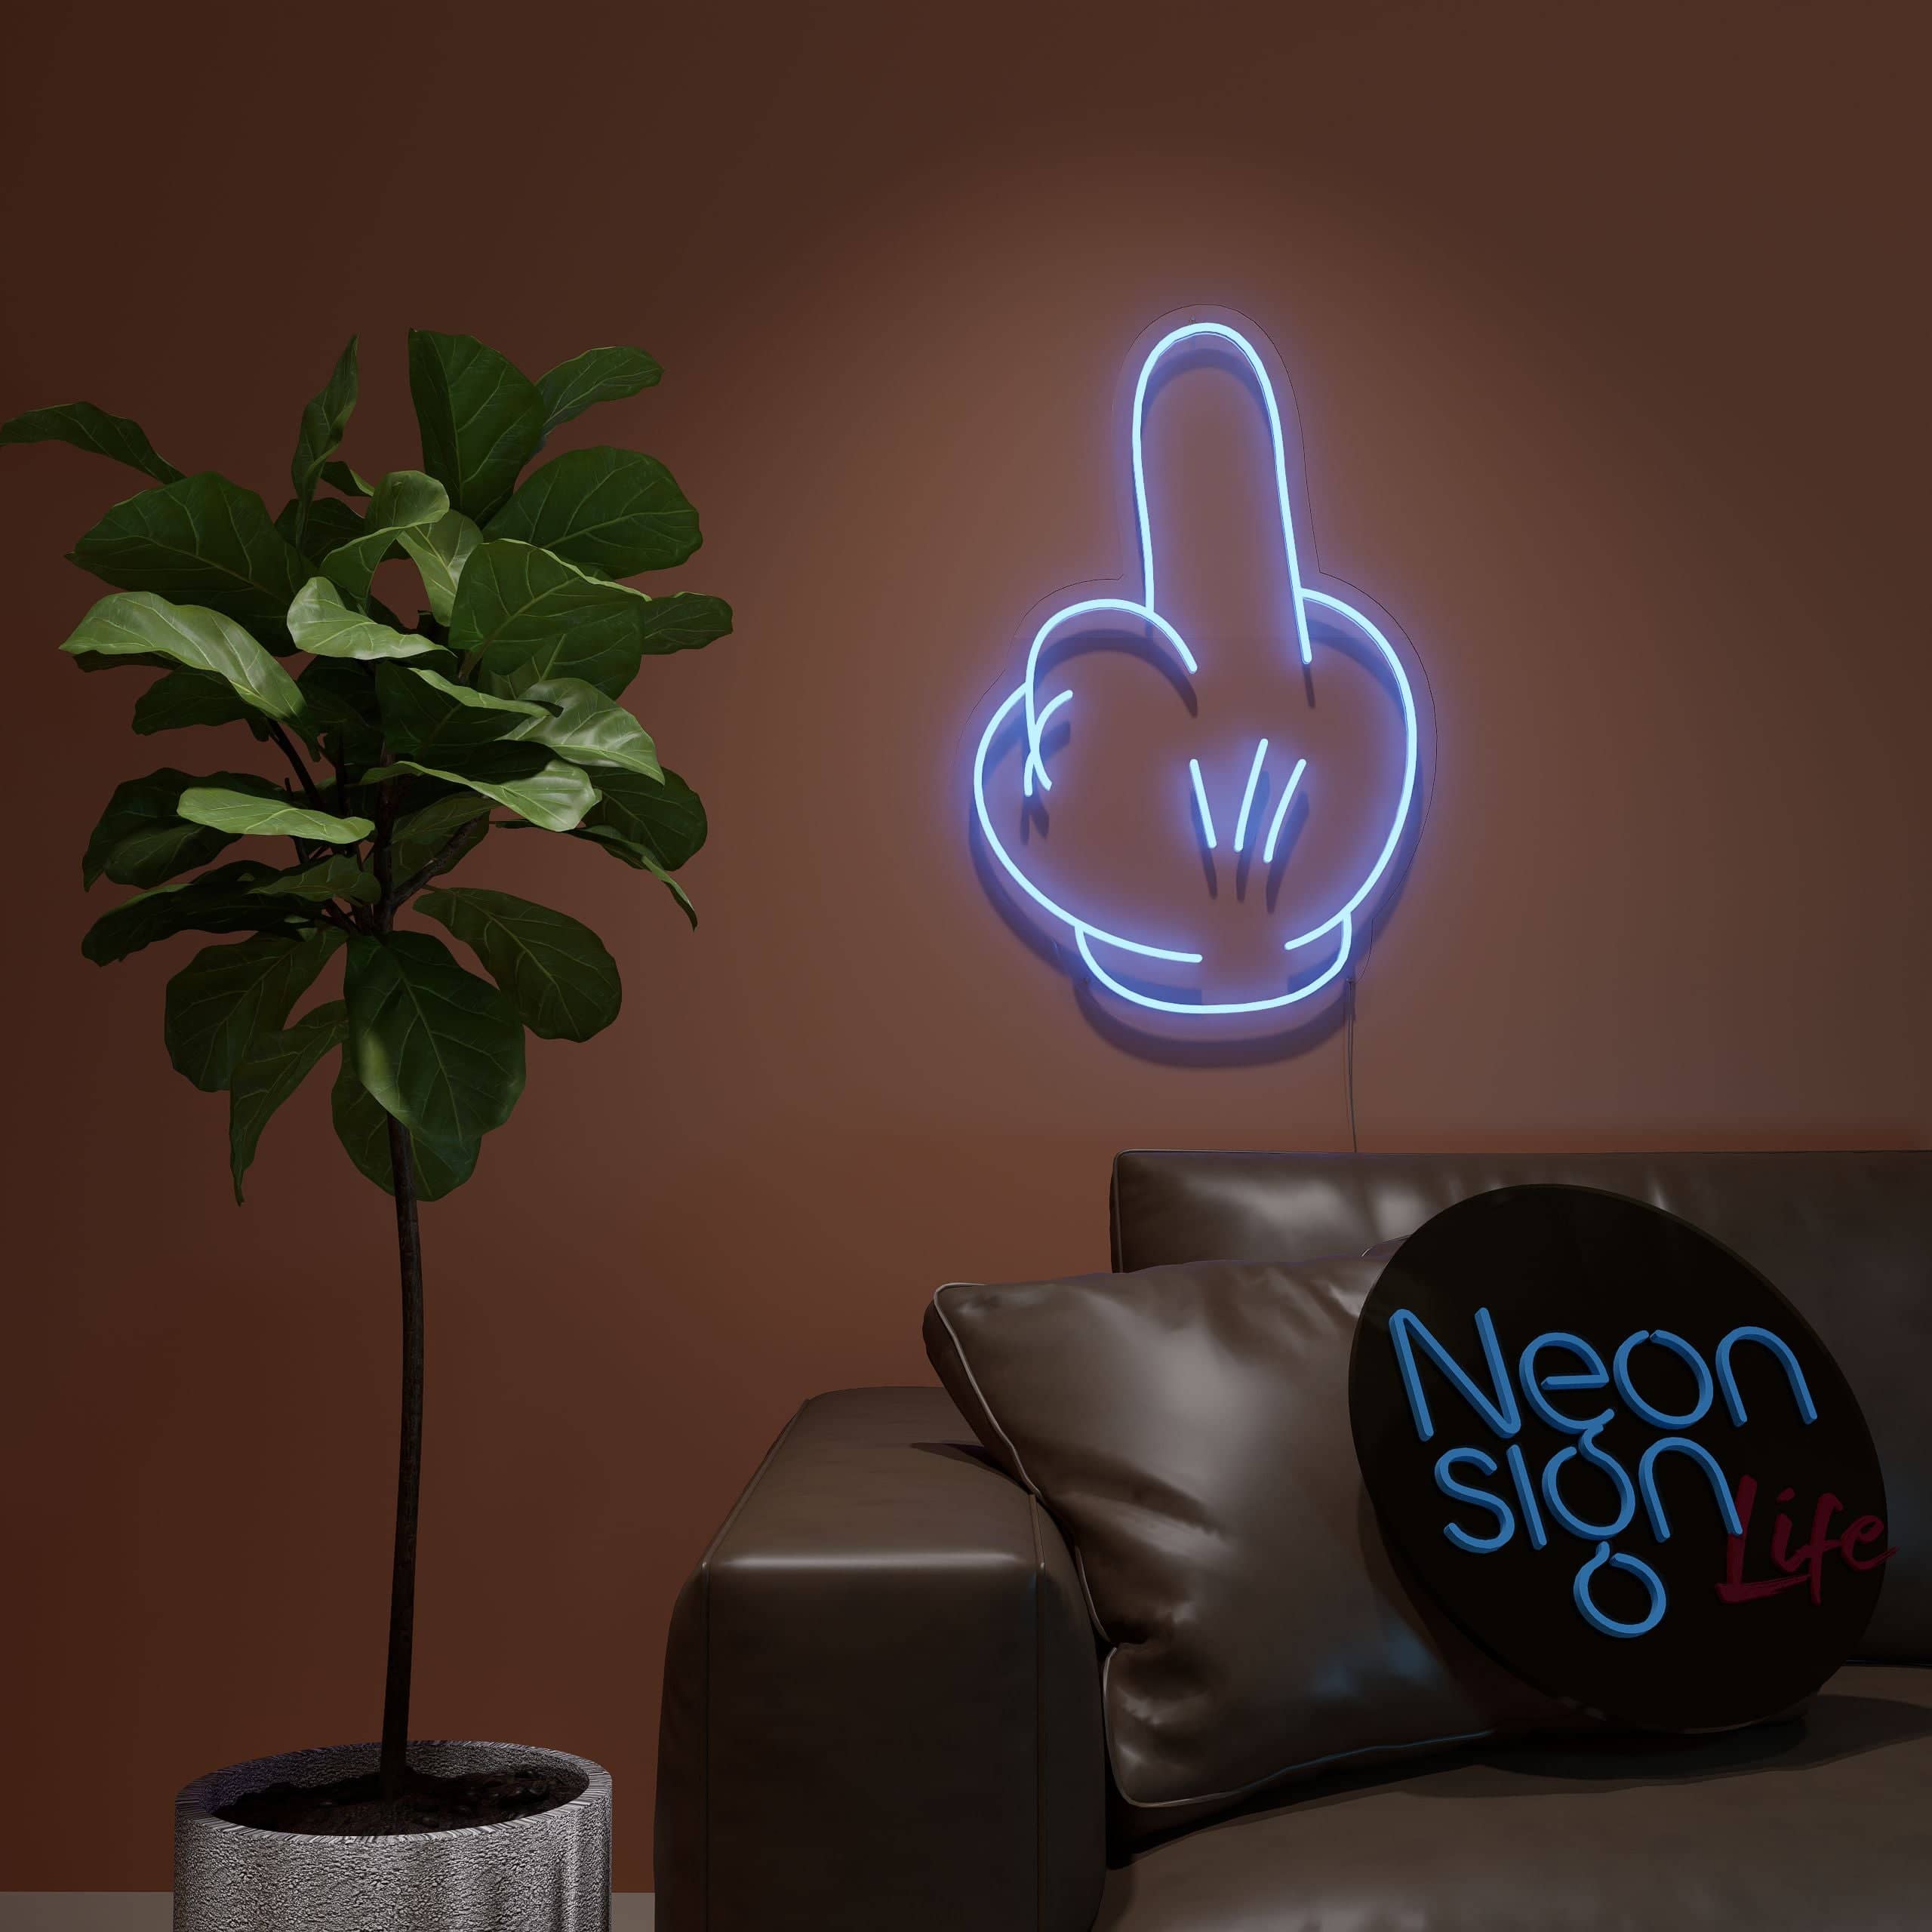 provocative-expression-cool neon signs